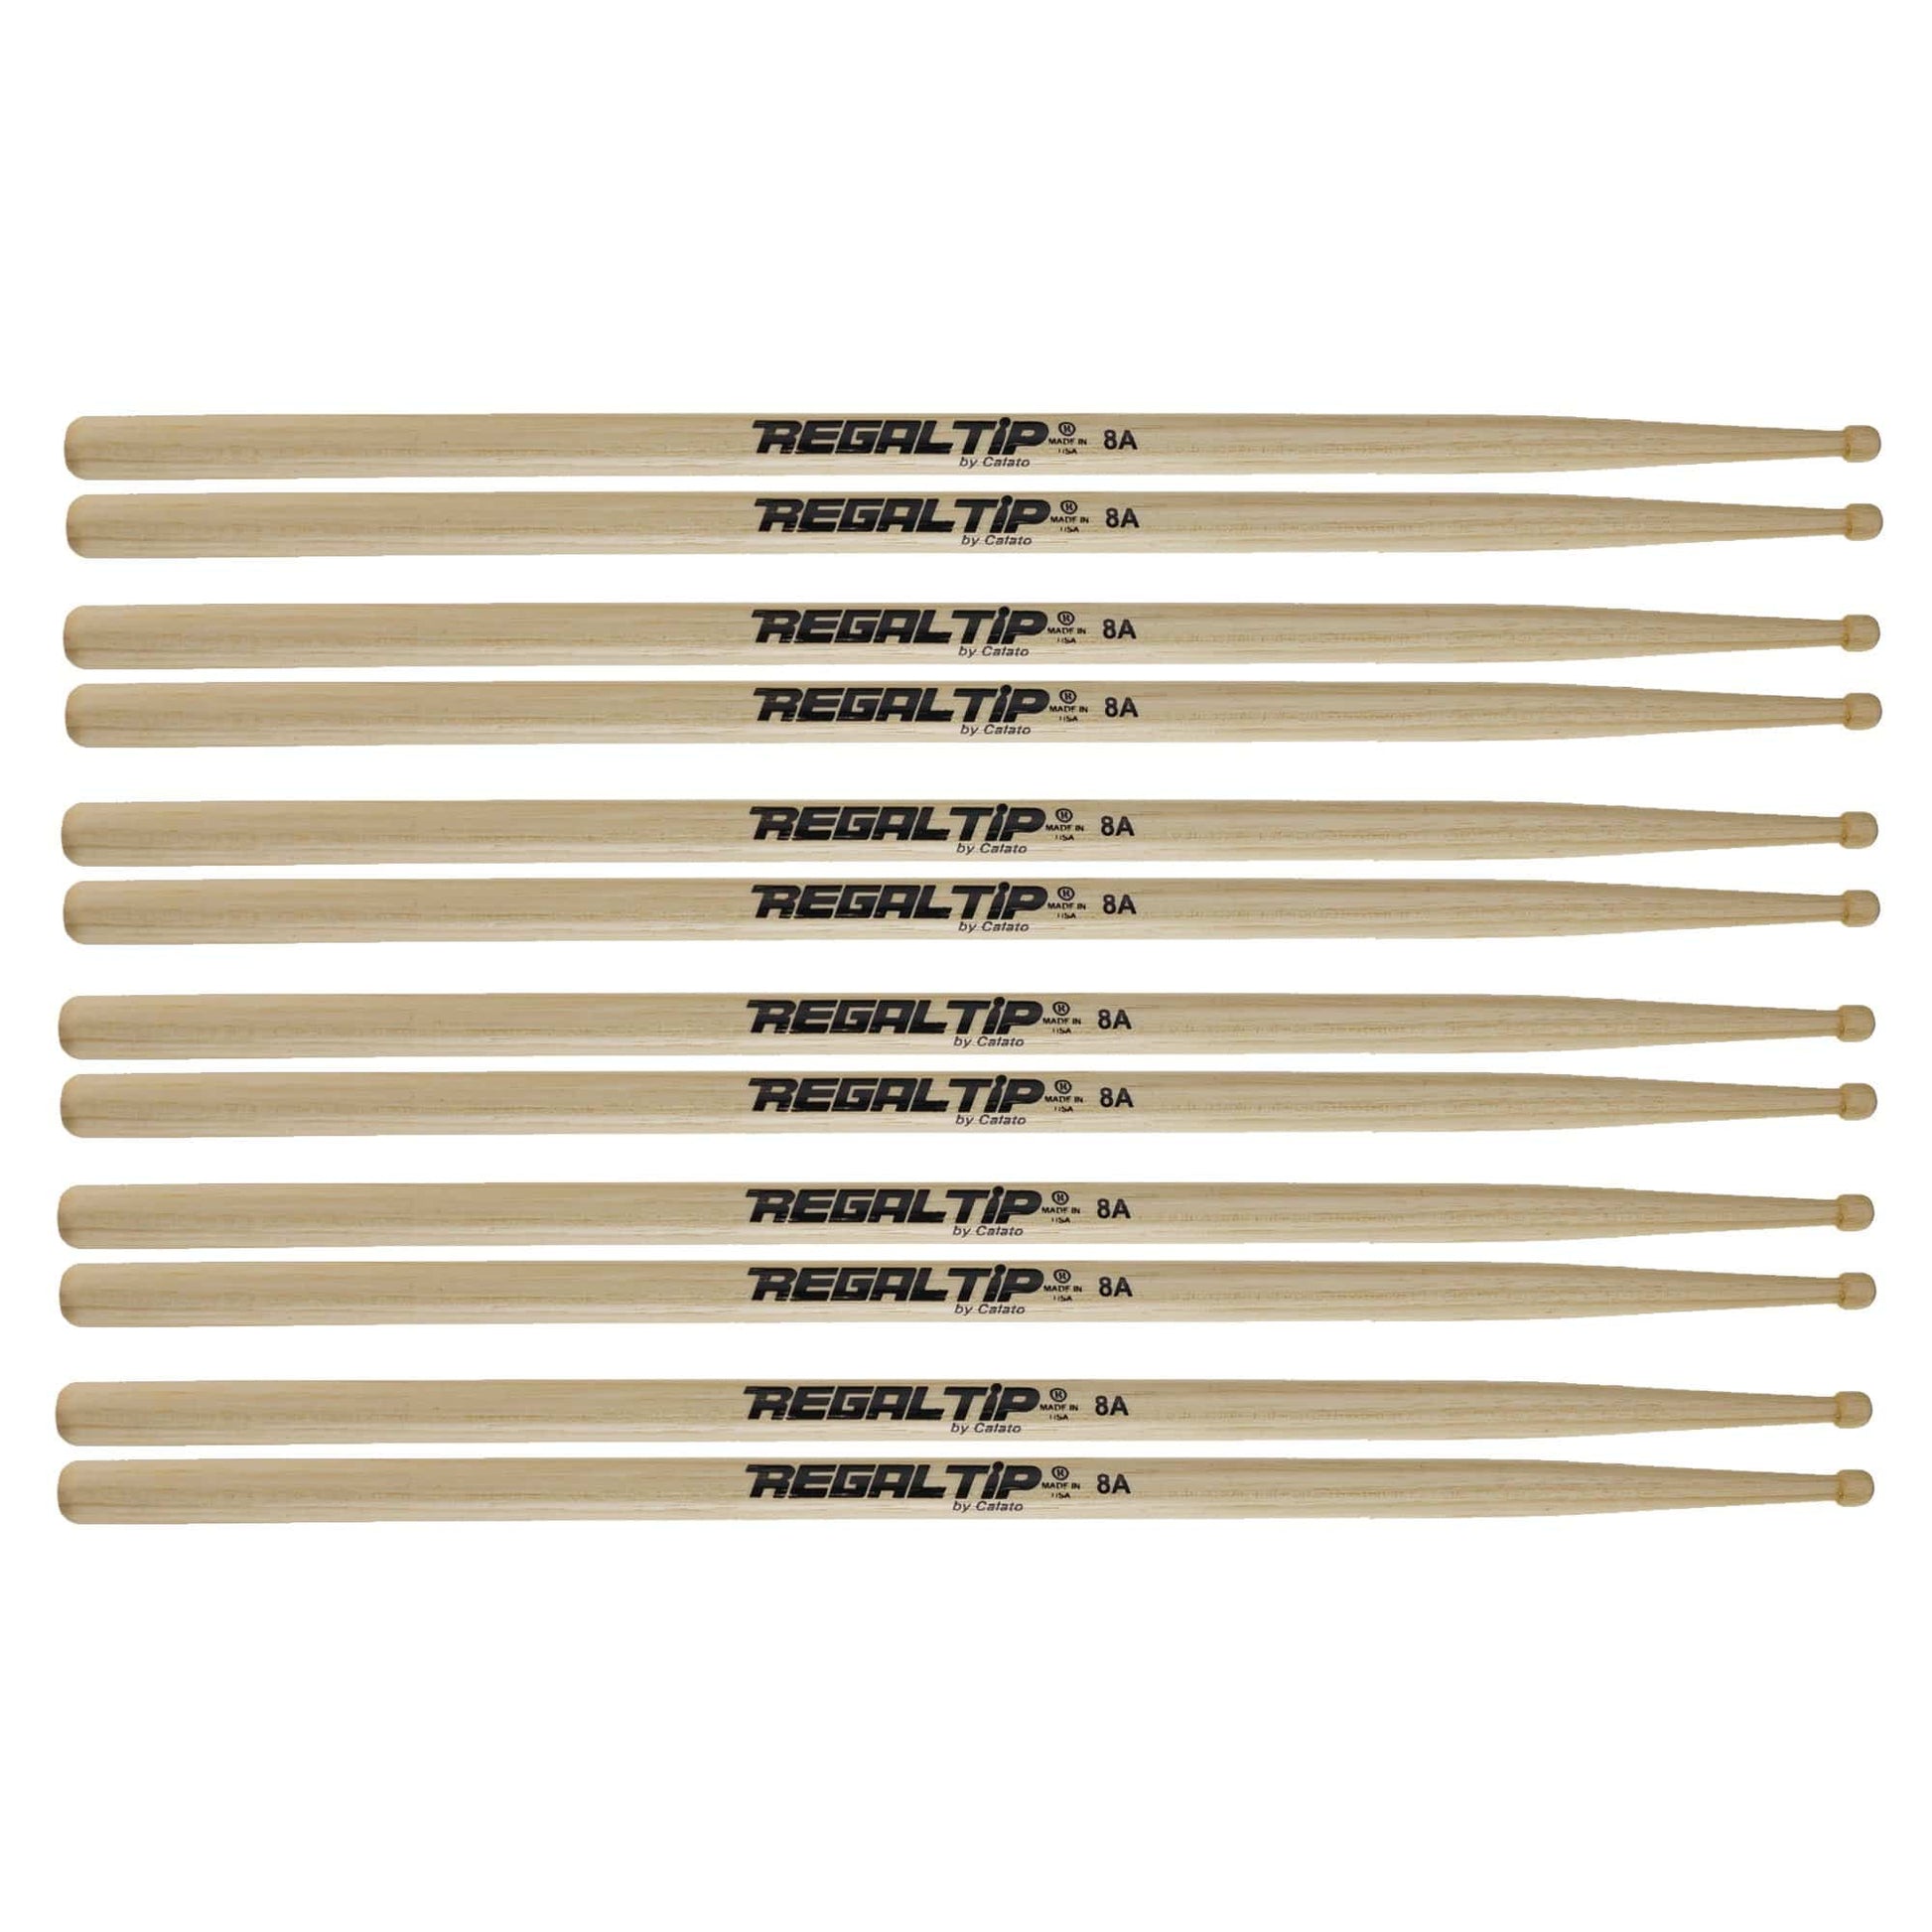 Regal Tip 8A Wood Tip Drum Sticks (6 Pair Bundle) Drums and Percussion / Parts and Accessories / Drum Sticks and Mallets